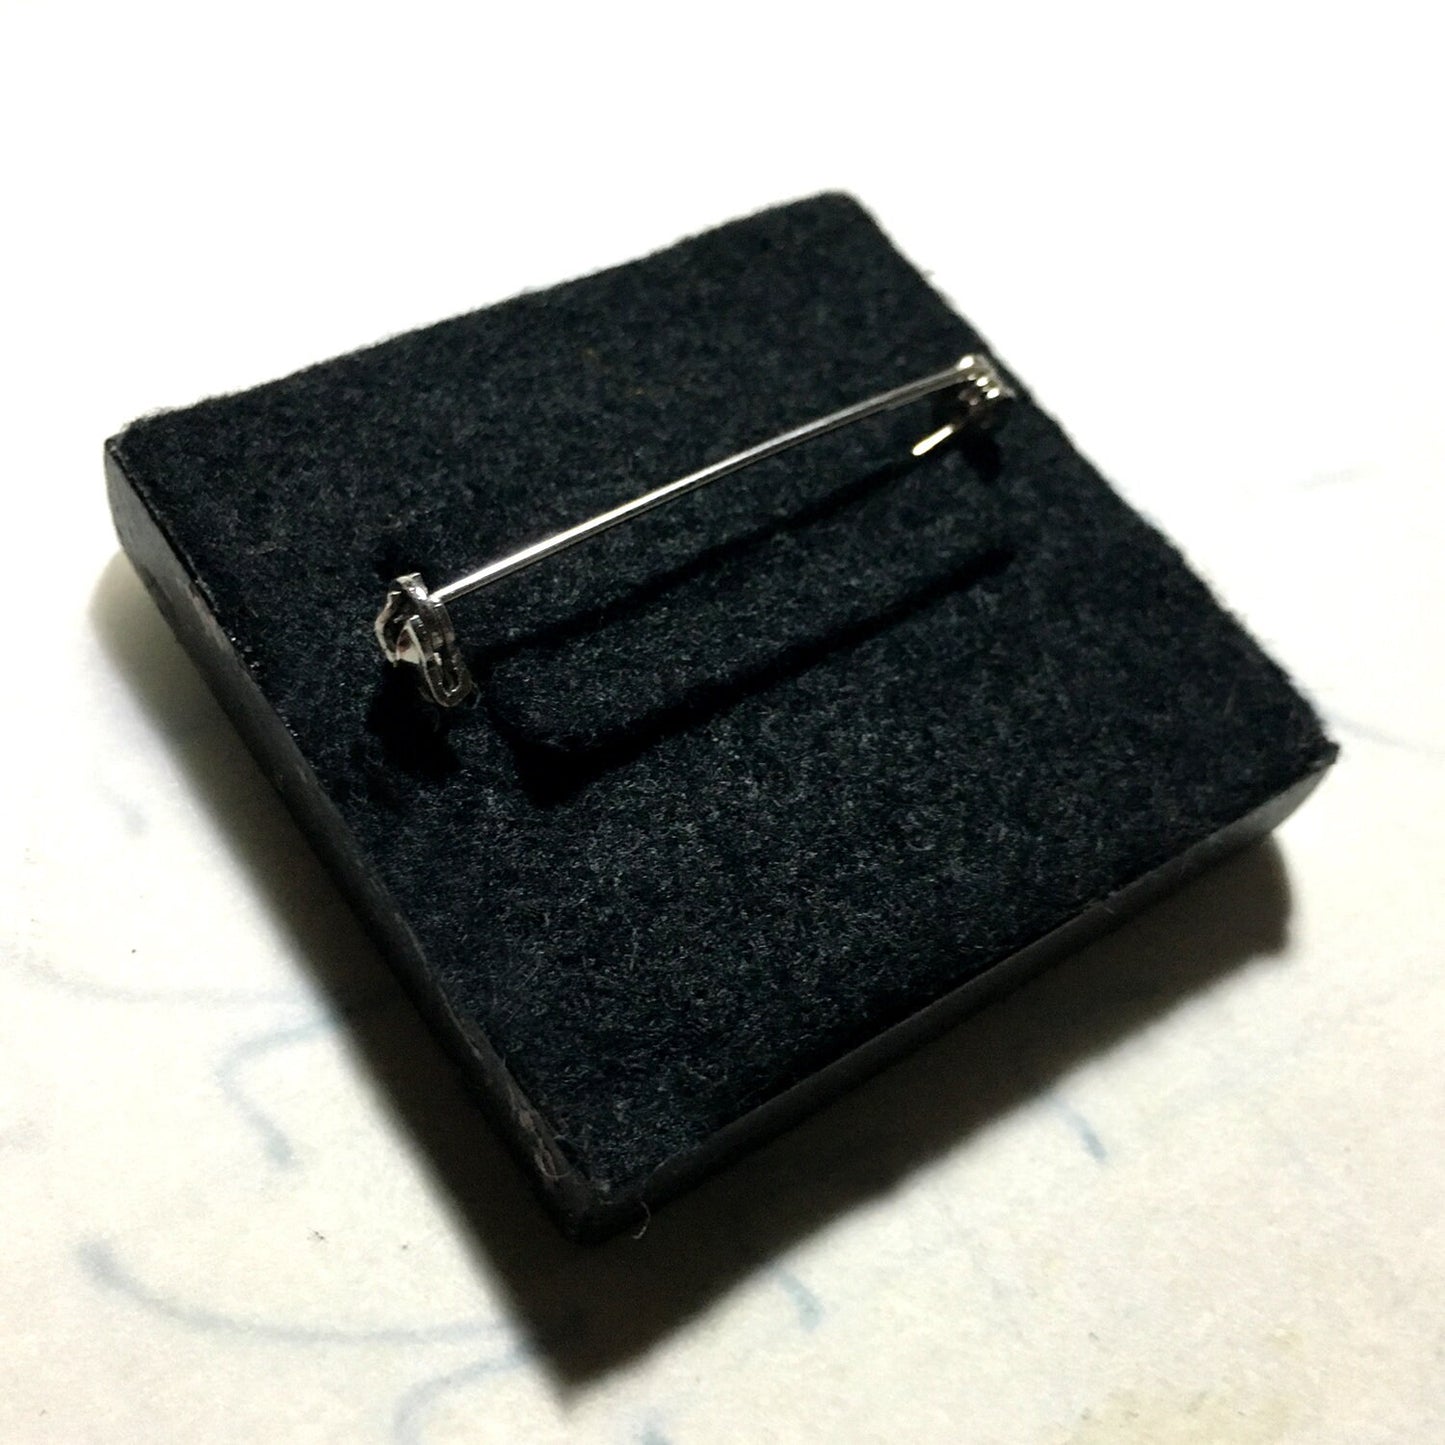 back side of the wooden brooch pin covered with black felt